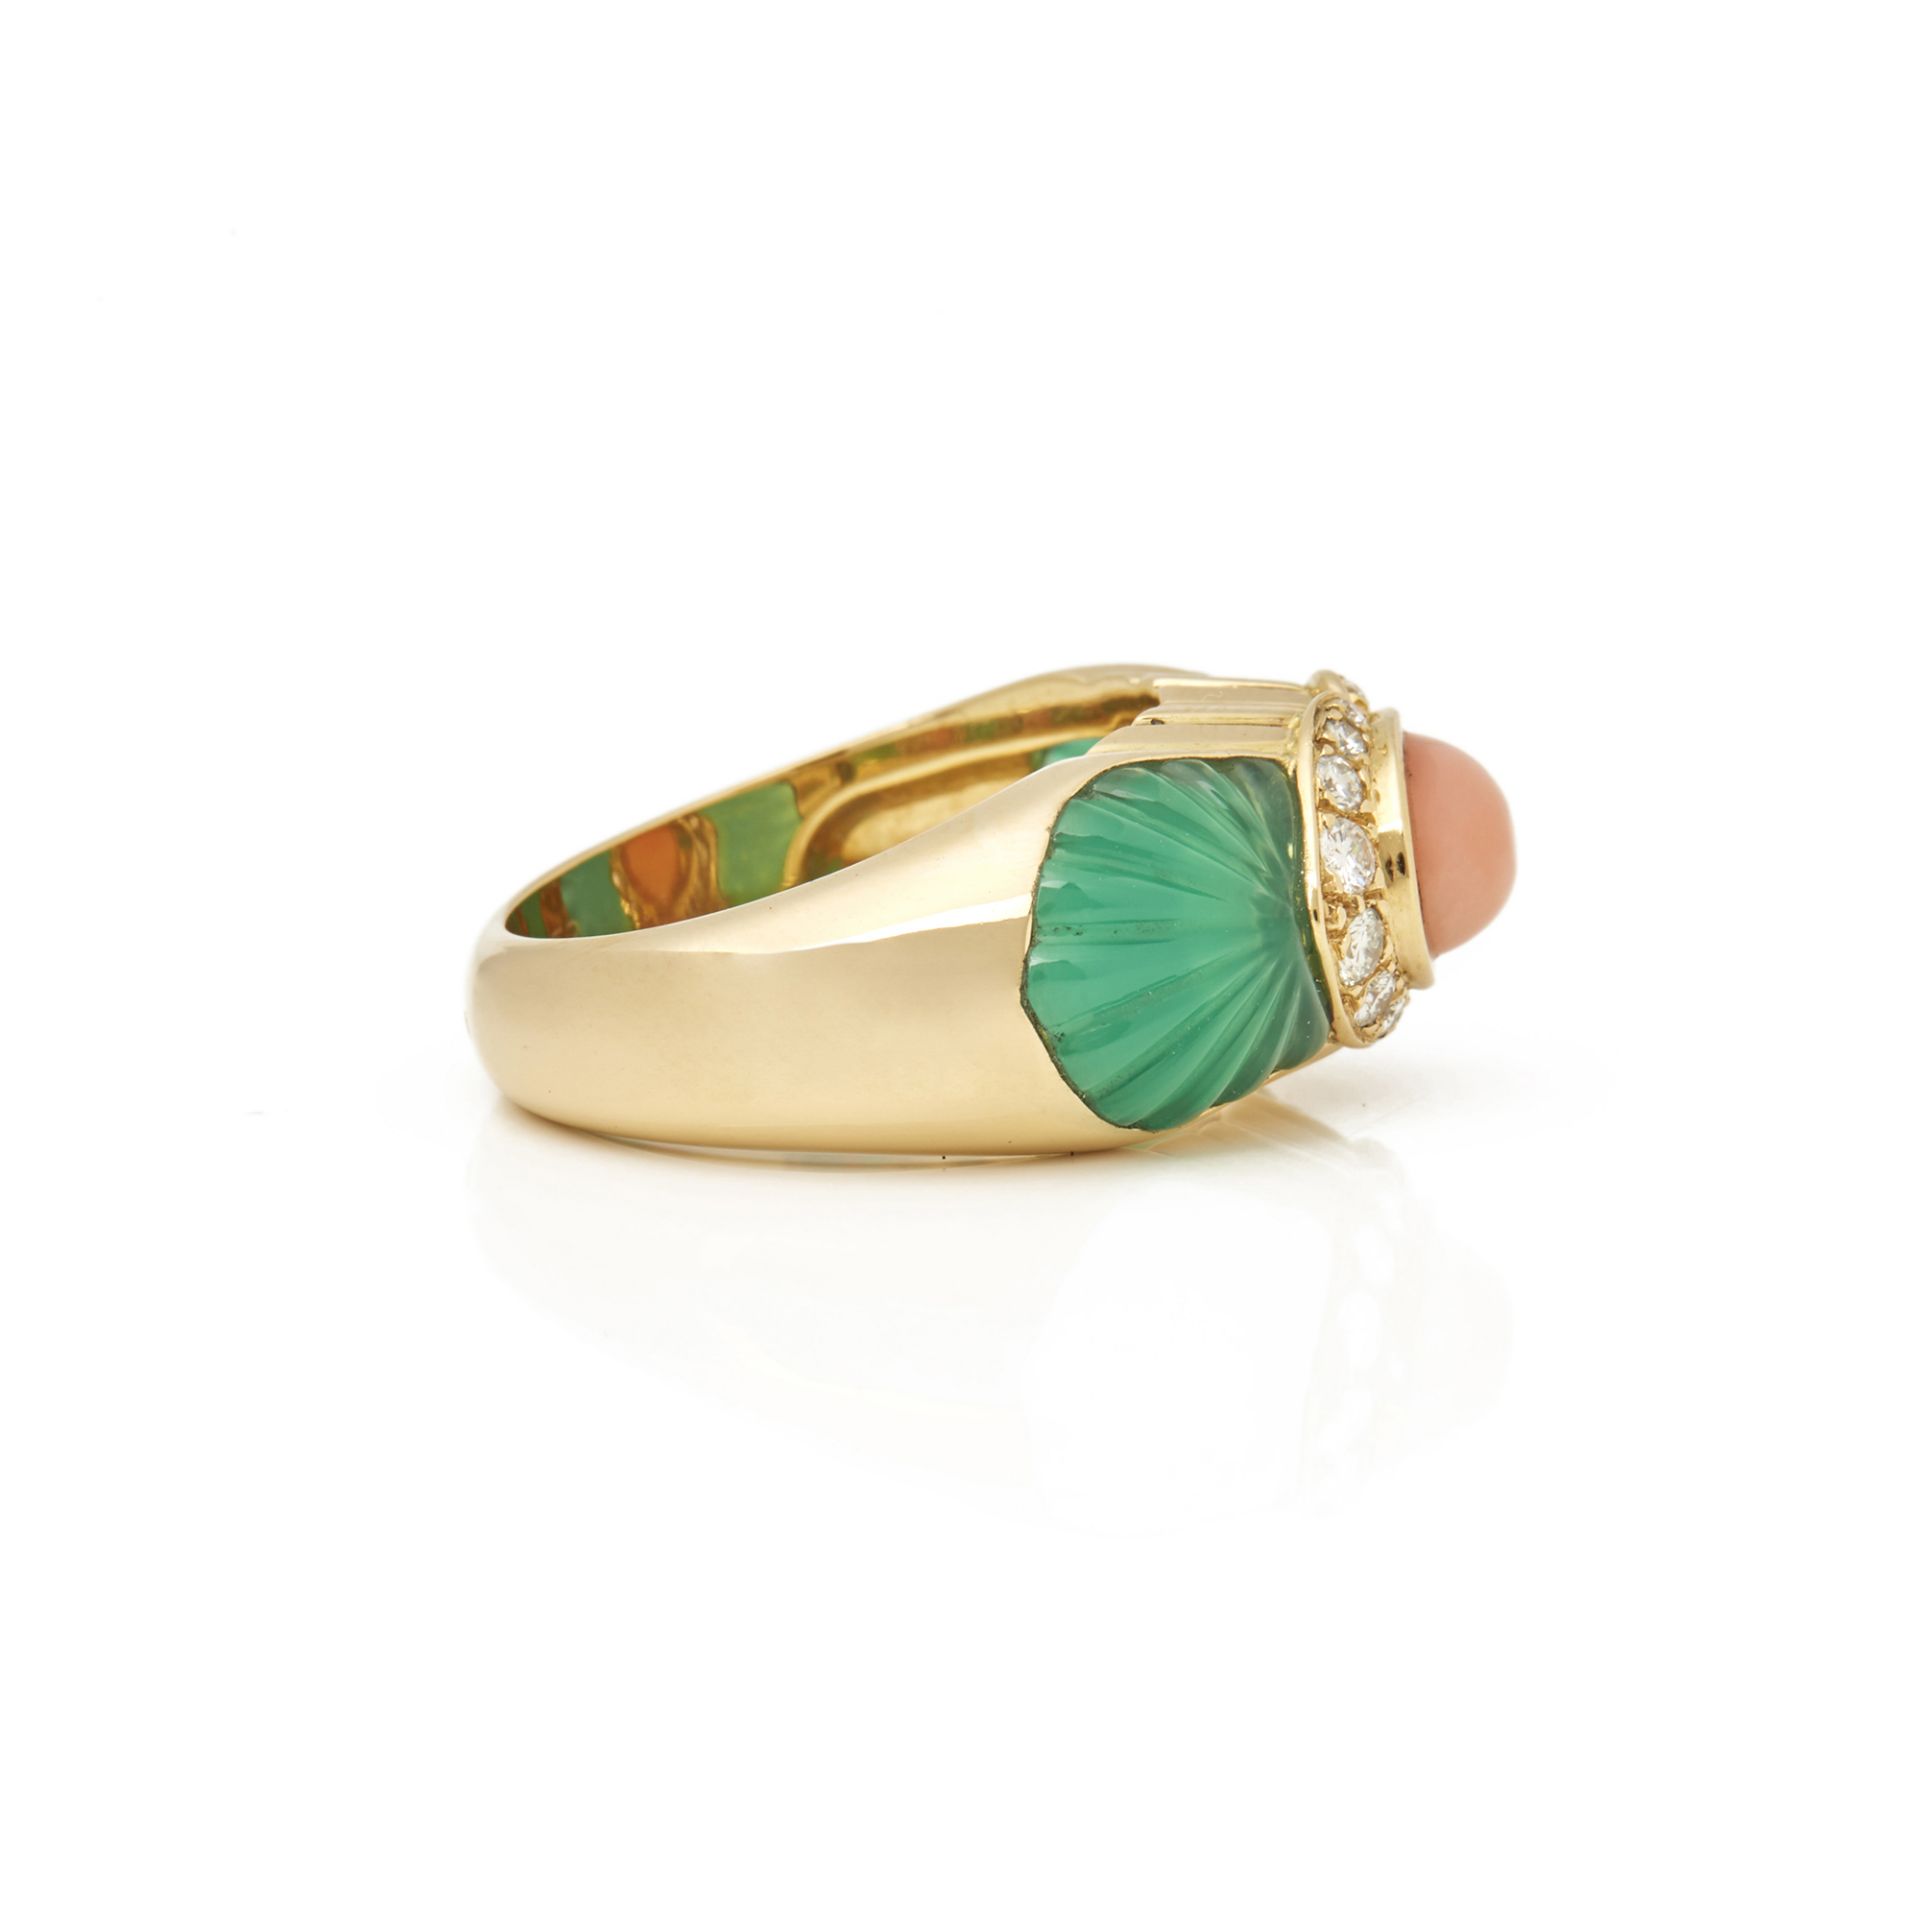 Cartier 18k Yellow Gold Chrysoprase, Coral & Diamond Ring - Image 6 of 7